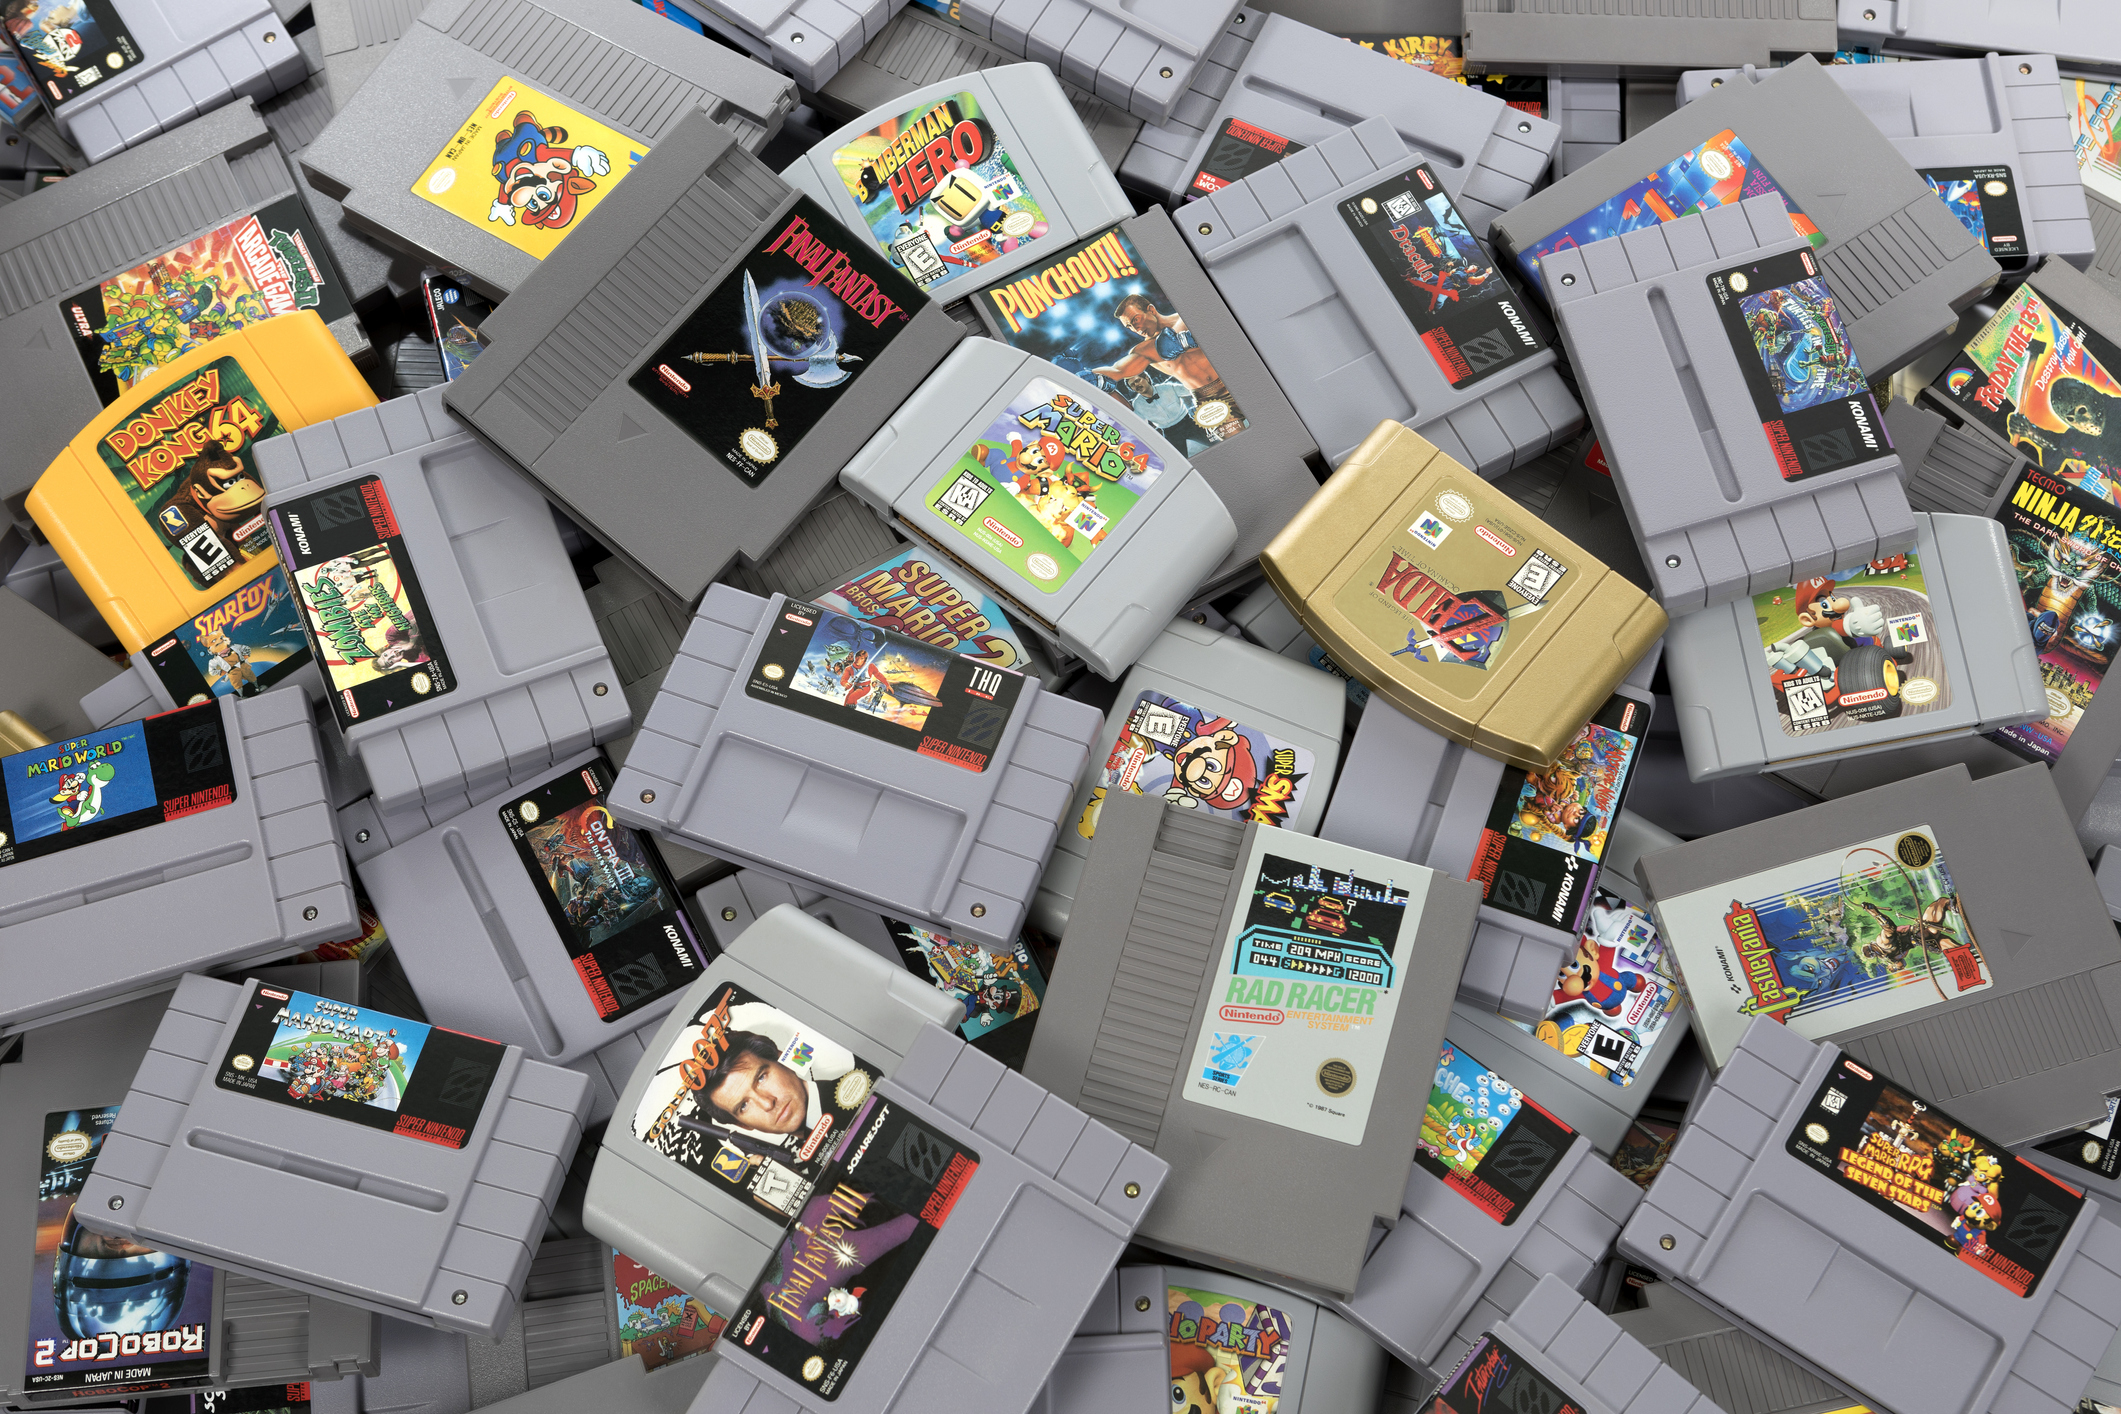 Nintendo games in a pile